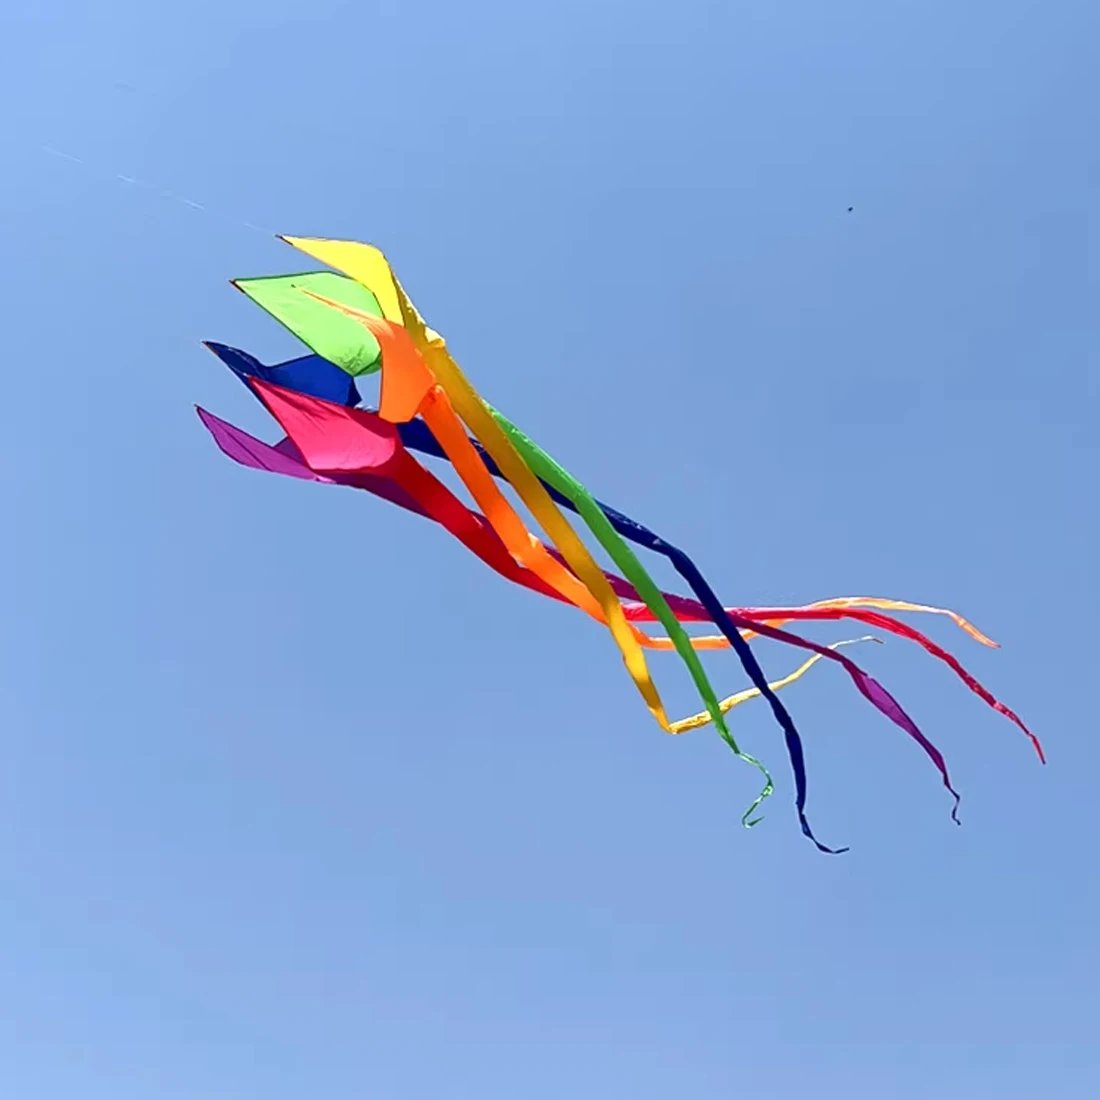 9KM 4m Windsock Spinner Turbine Line Laundry Pendant Soft Inflatable Show Kite 40D Ripstop Nylon with Bag